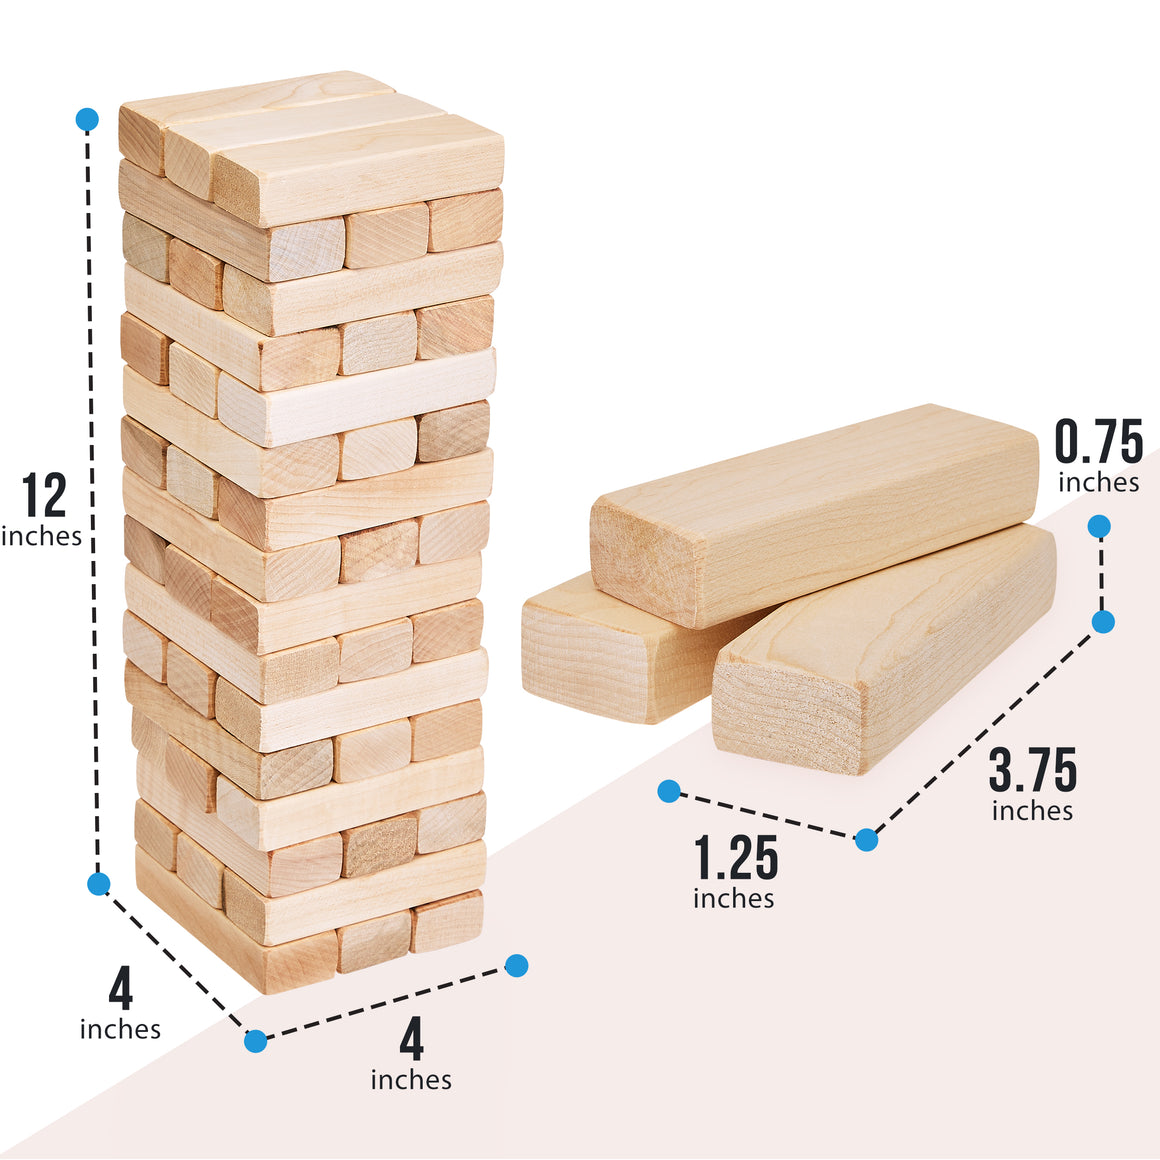 Pennsylvania Woodworks Maple Tumble Tower Game - Heavy Duty Timber Tower Wooden Block Set - Stackable Hardwood Blocks - Tabletop & Outdoor Family Games - Pennsylvania Woodworks